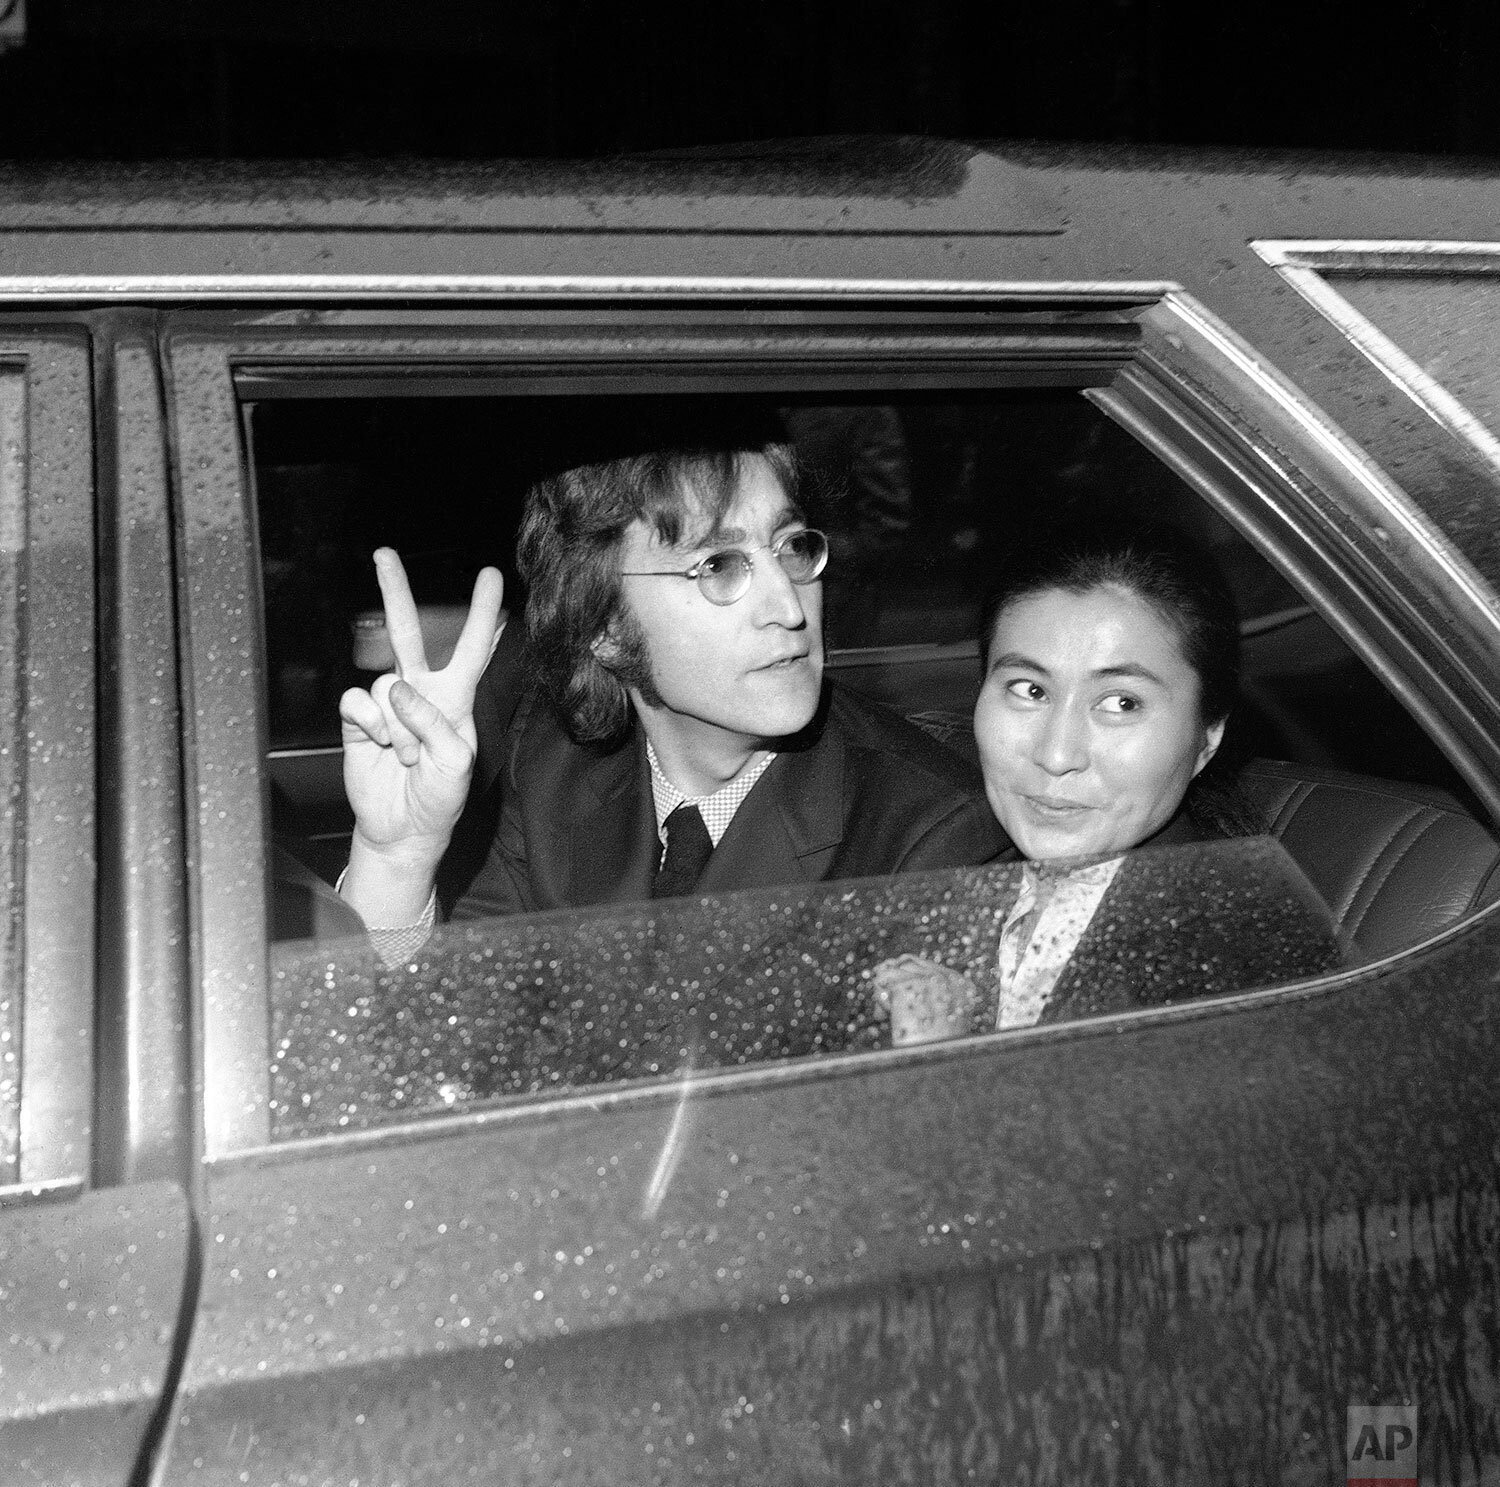  Former Beatle John Lennon, left, and his wife Yoko Ono, leave the Immigration and Naturalization Service, at 20 West Broadway, March 16, 1972, New York. His case was postponed and comes up in April. (AP Photo/Anthony Camerano) 